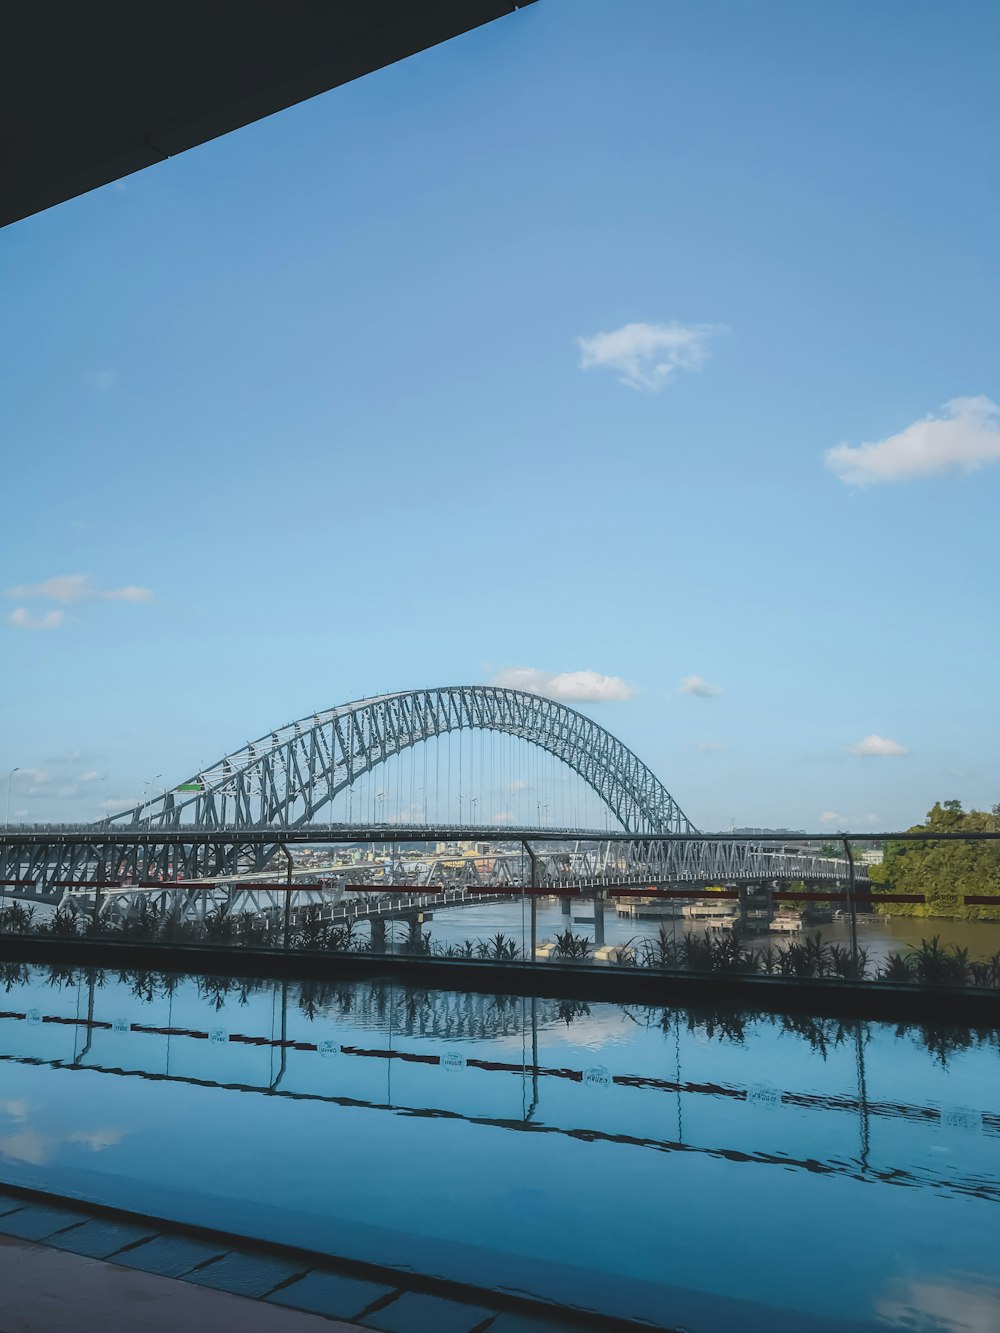 a bridge over a body of water under a blue sky